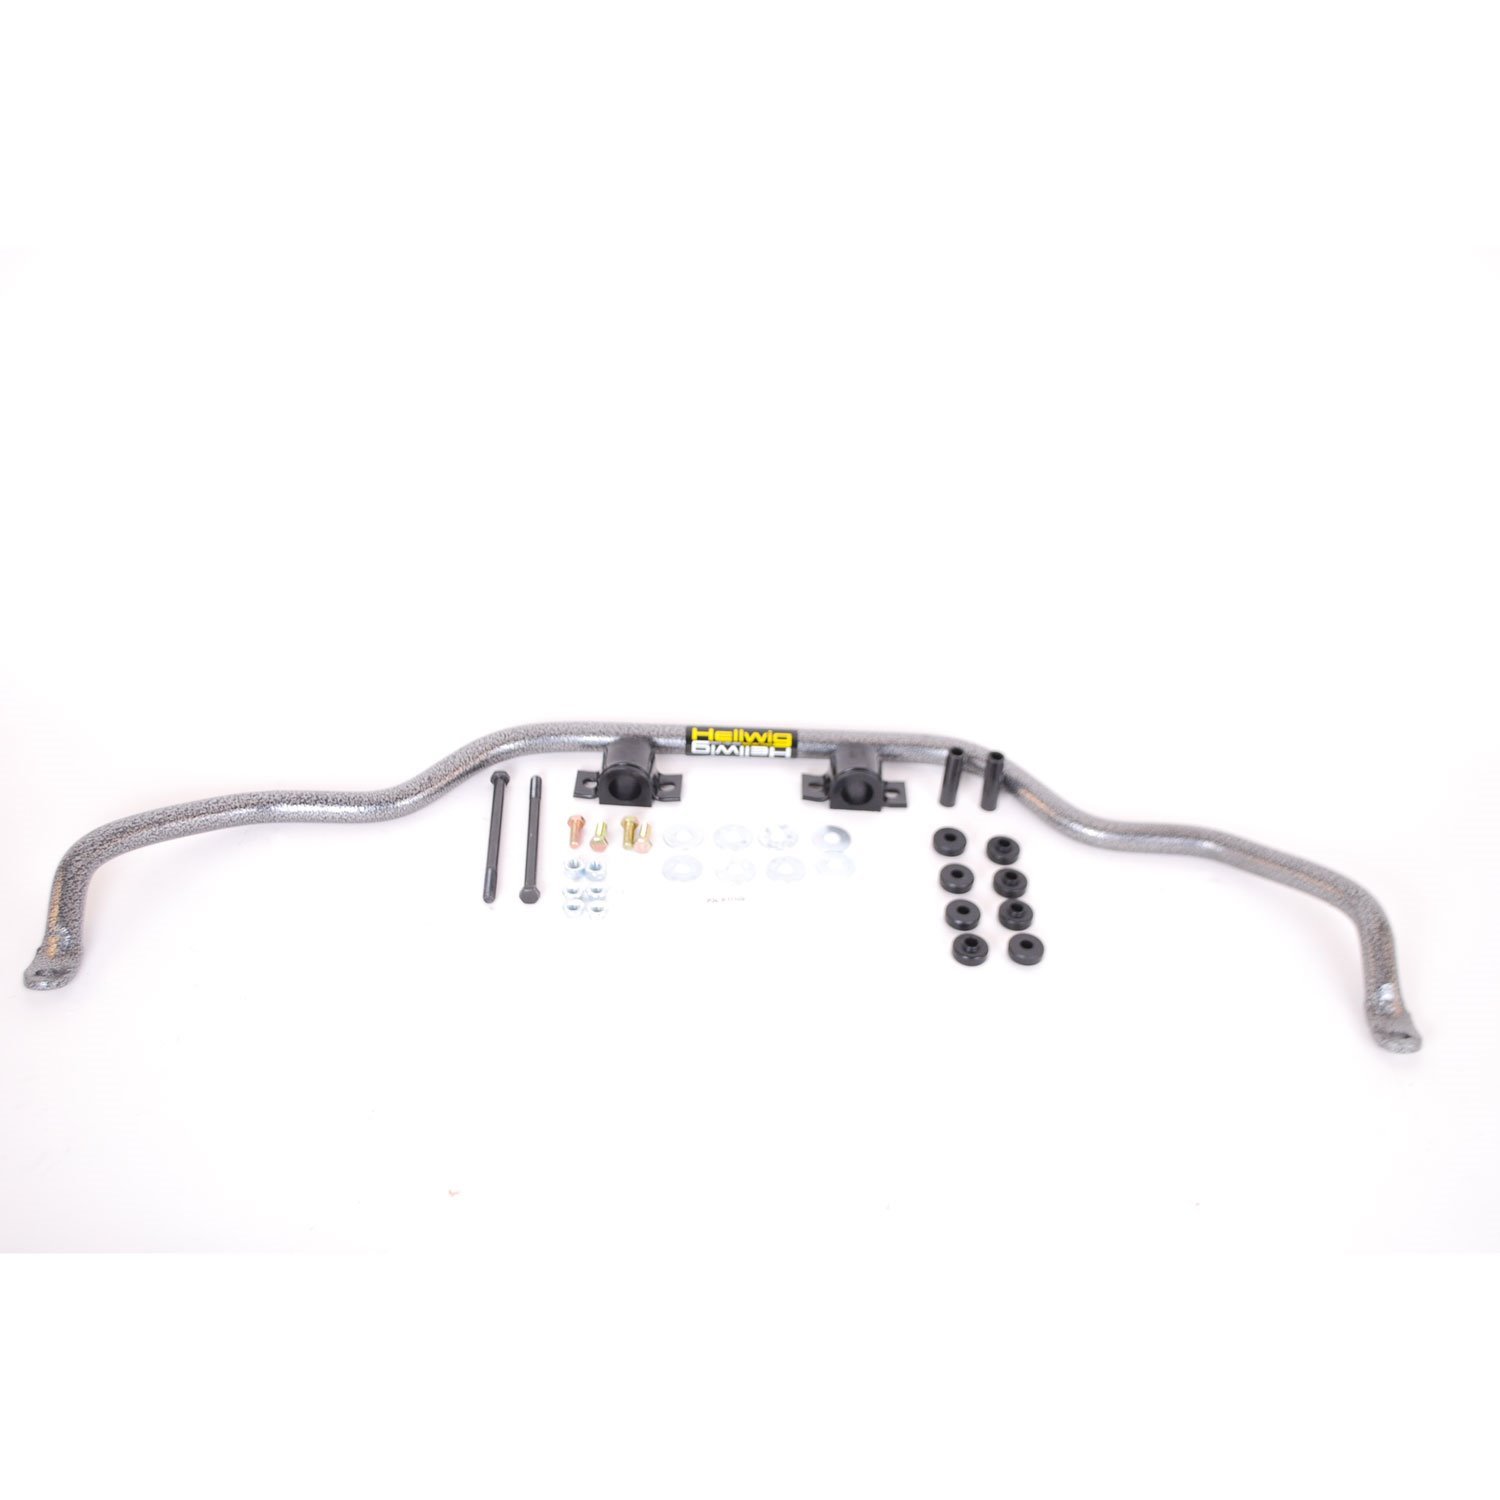 Front Sway Bar 1971-73 Ford Mustang and Mercury